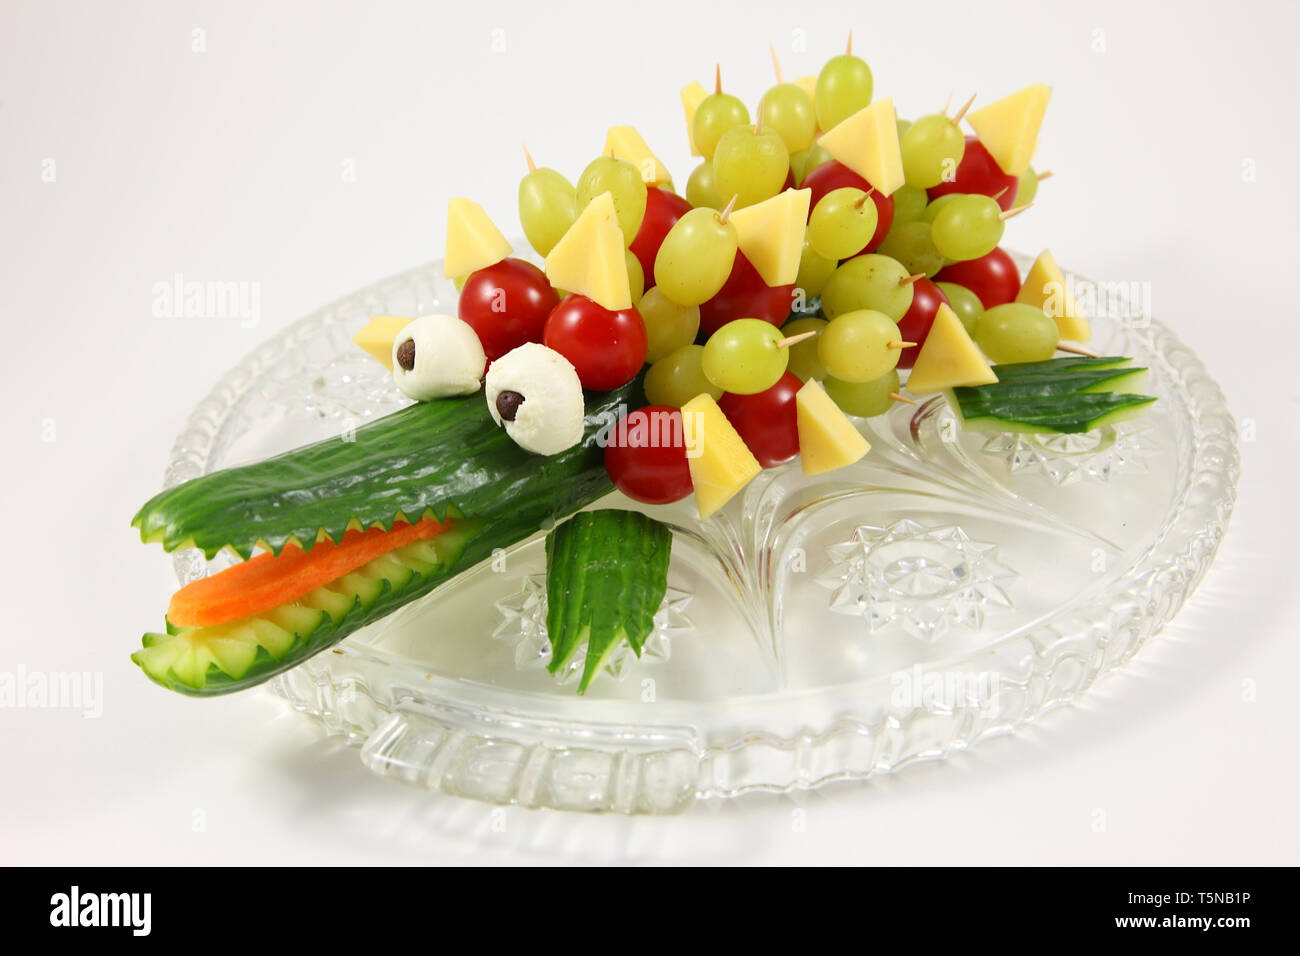 A crocodile carved out of a cucumber. Stock Photo